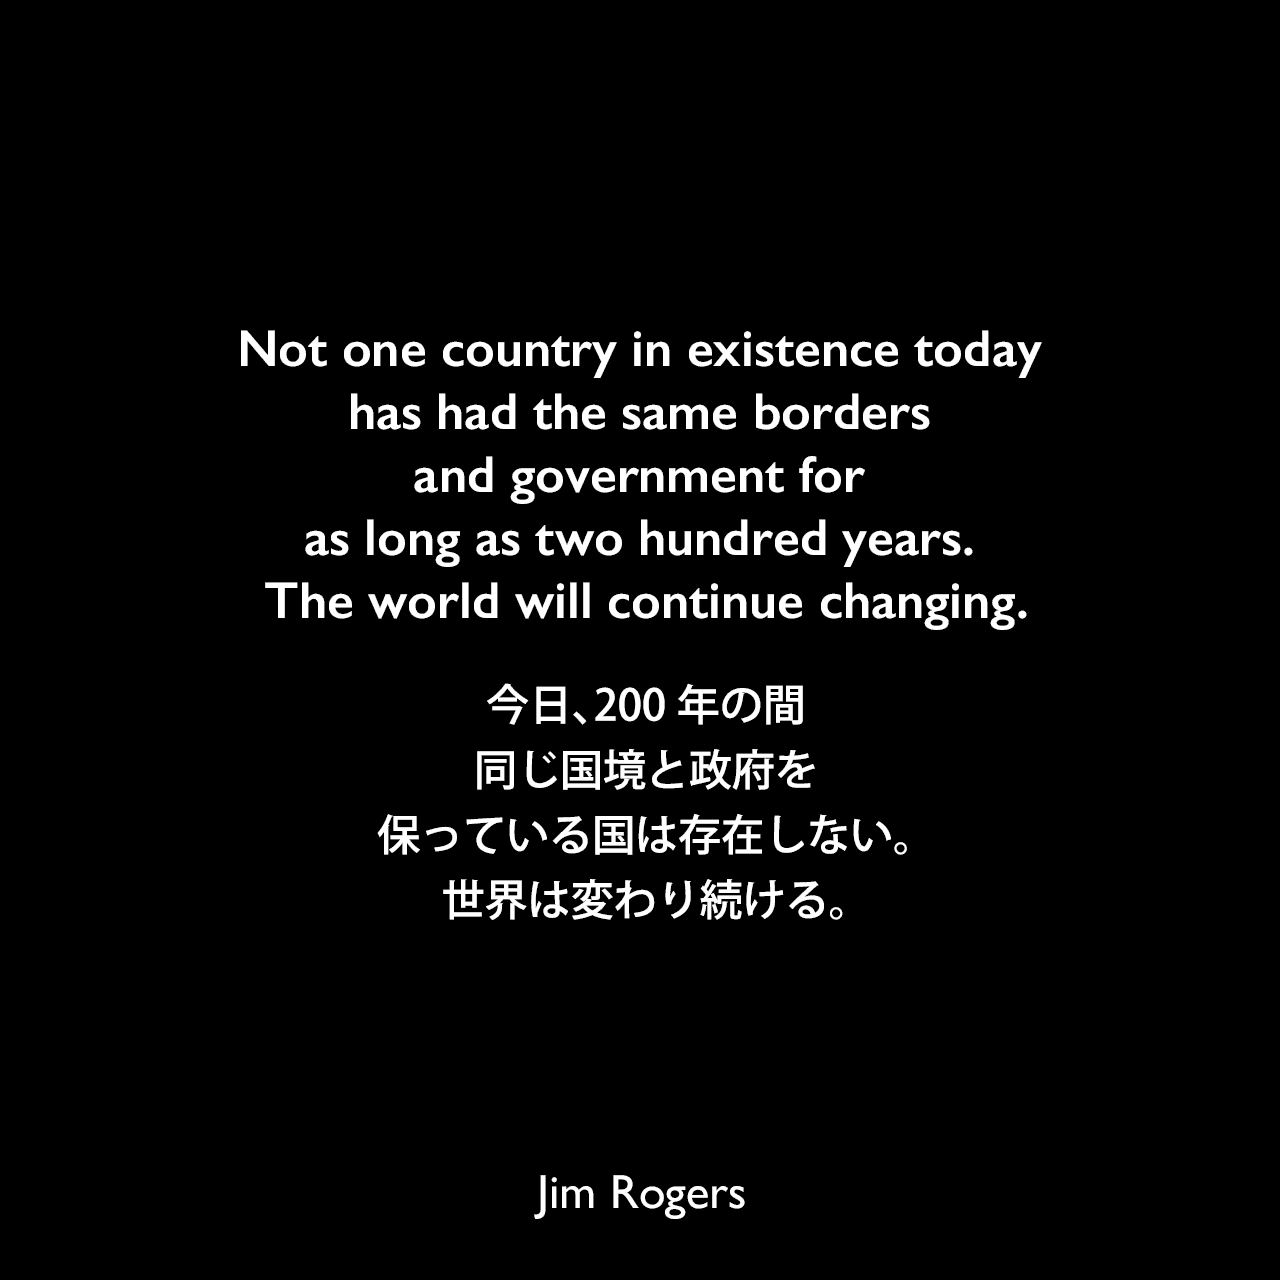 Not one country in existence today has had the same borders and government for as long as two hundred years. The world will continue changing.今日、200年の間、同じ国境と政府を保っている国は存在しない。世界は変わり続ける。《参照：A Gift to My Children: A Father's Lessons for Life and Investing(2009)》Jim Rogers